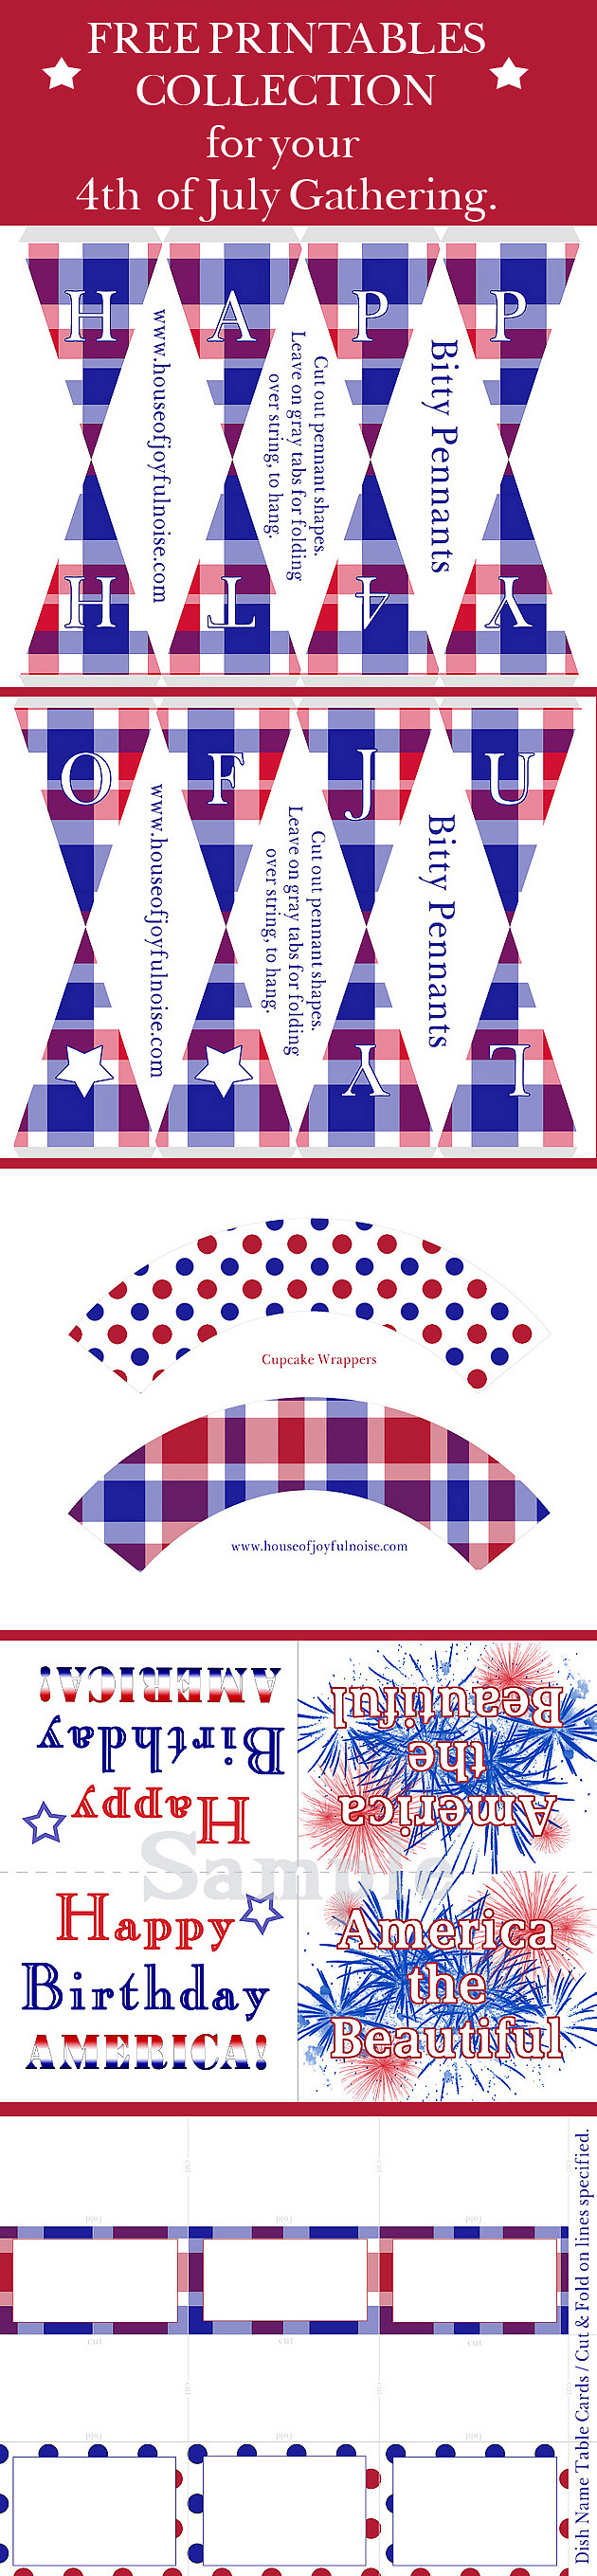 4th-fourth-of-july-free-printables